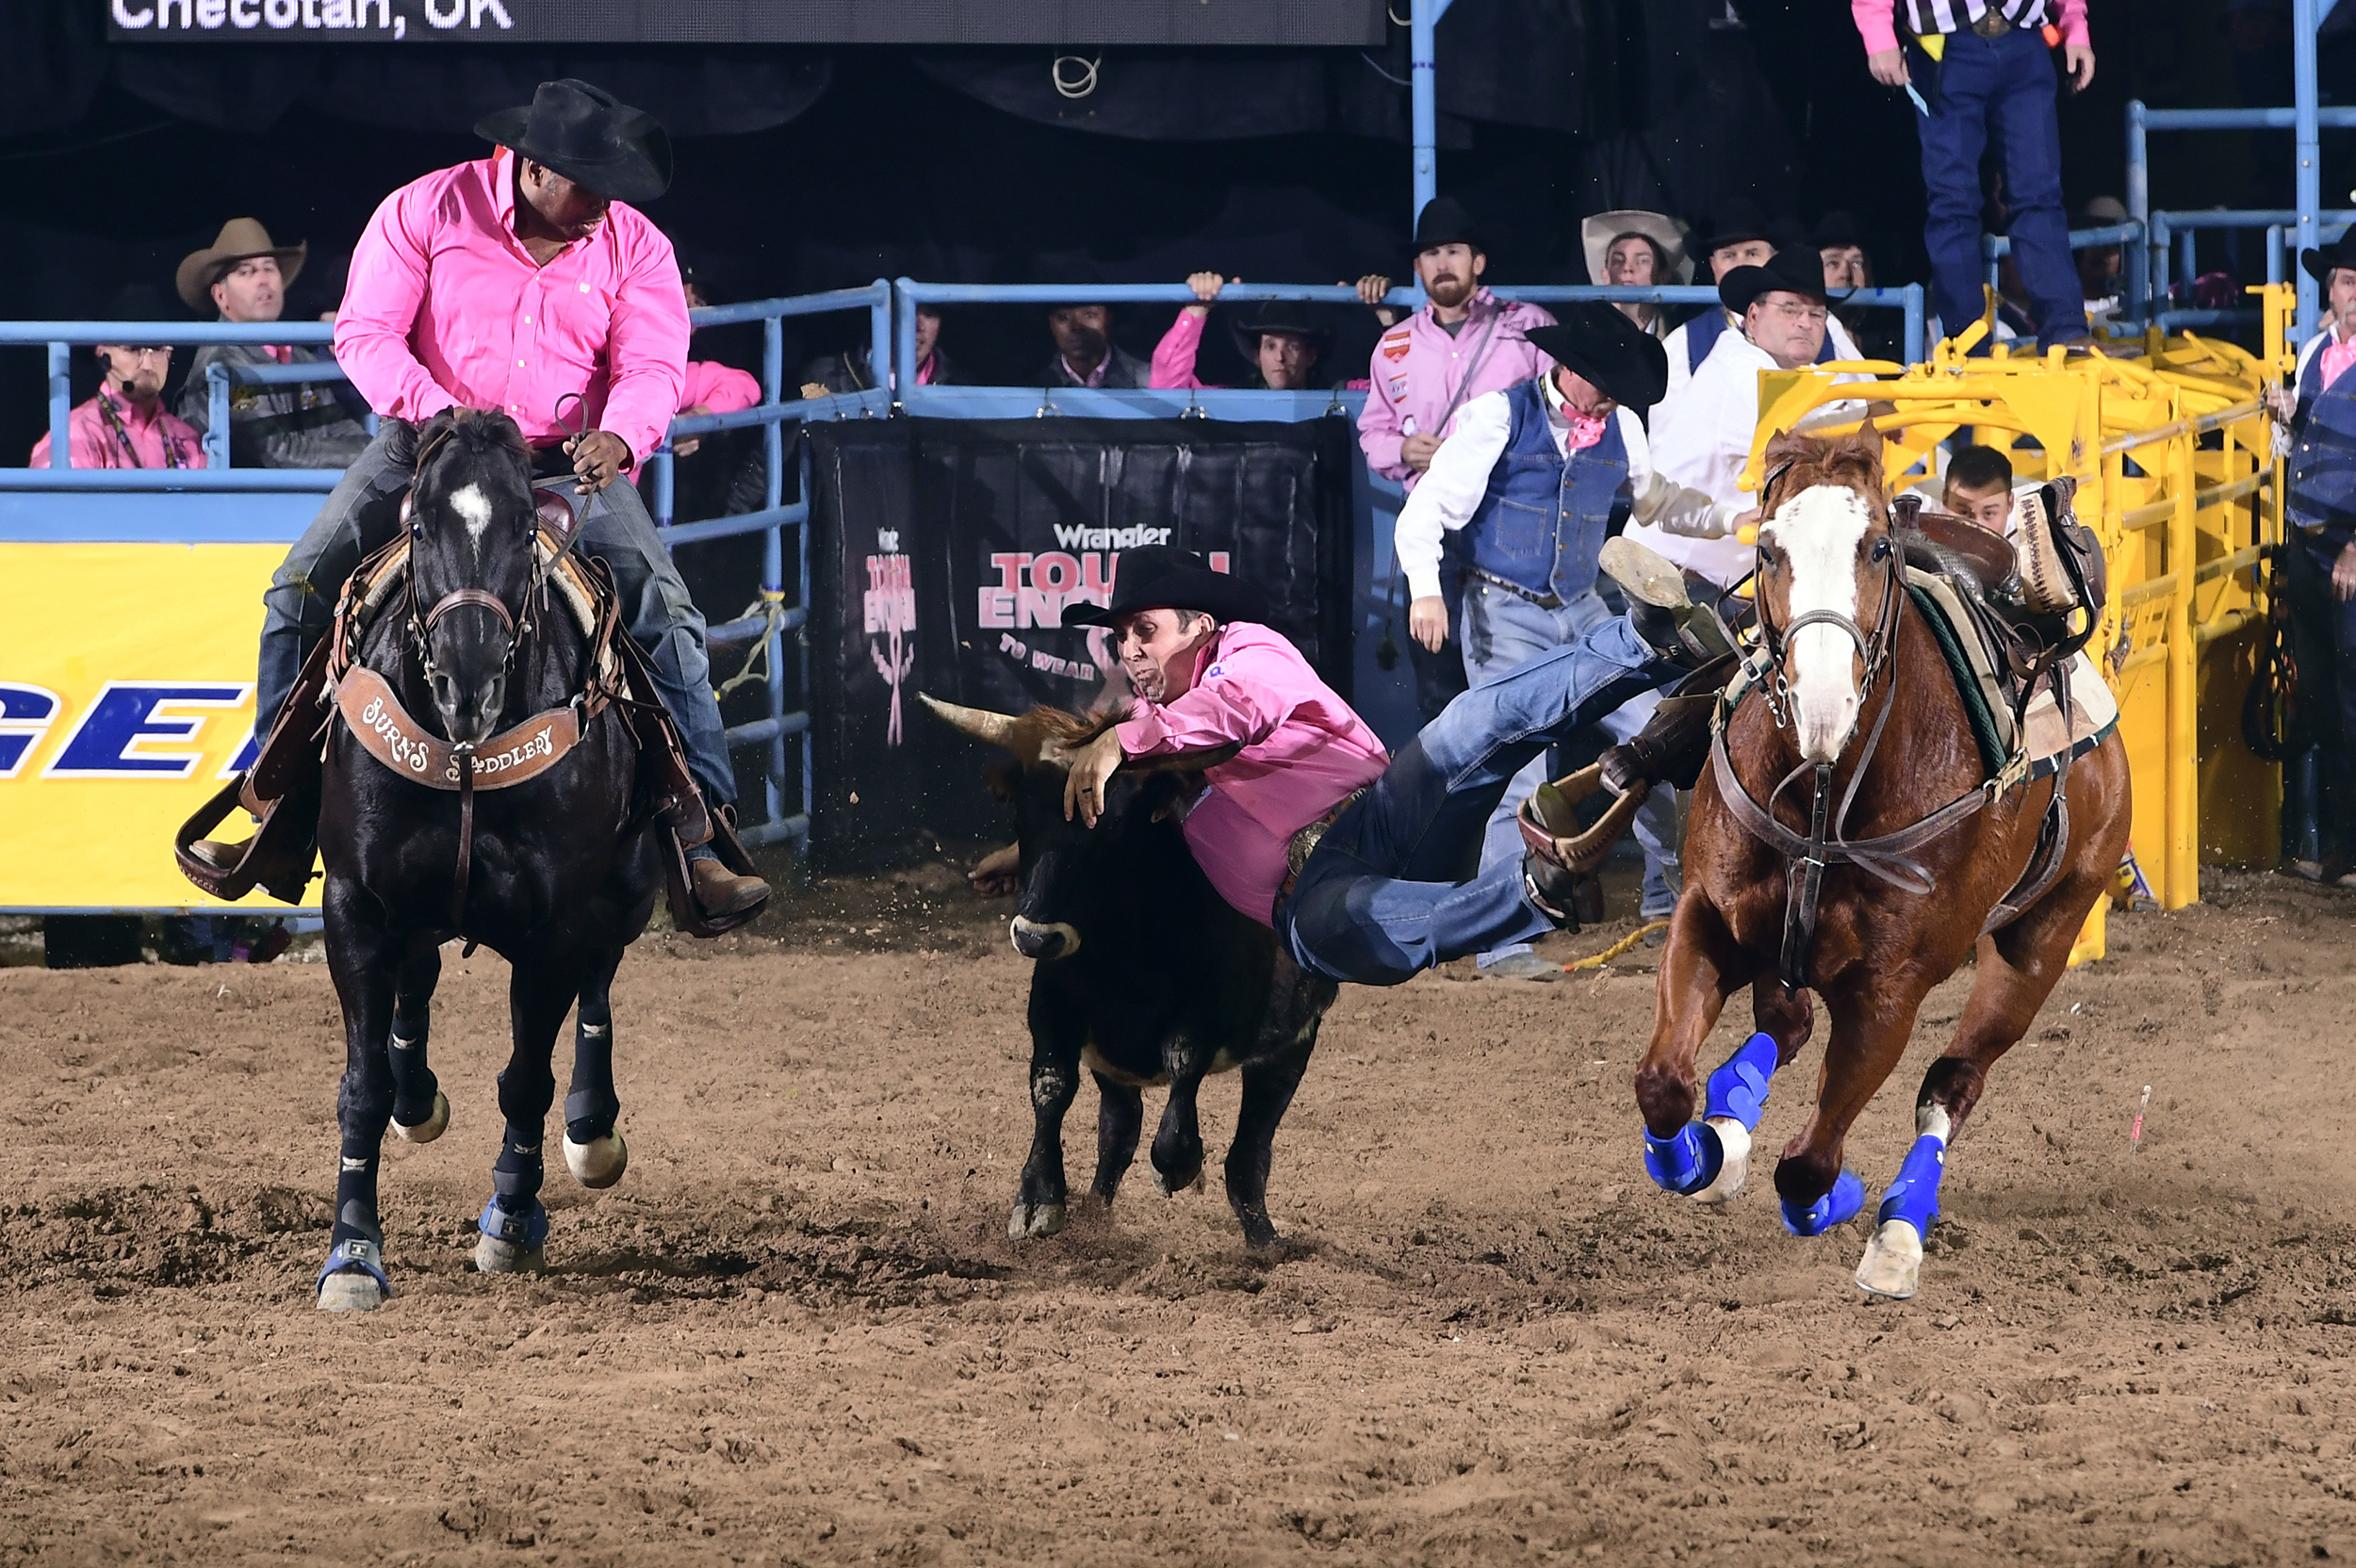 Riley Duvall will ride into Las Vegas for his third National Finals Rodeo qualification as the No. 7-ranked steer wrestler in the world standings. (PHOTO BY JAMES PHIFER)